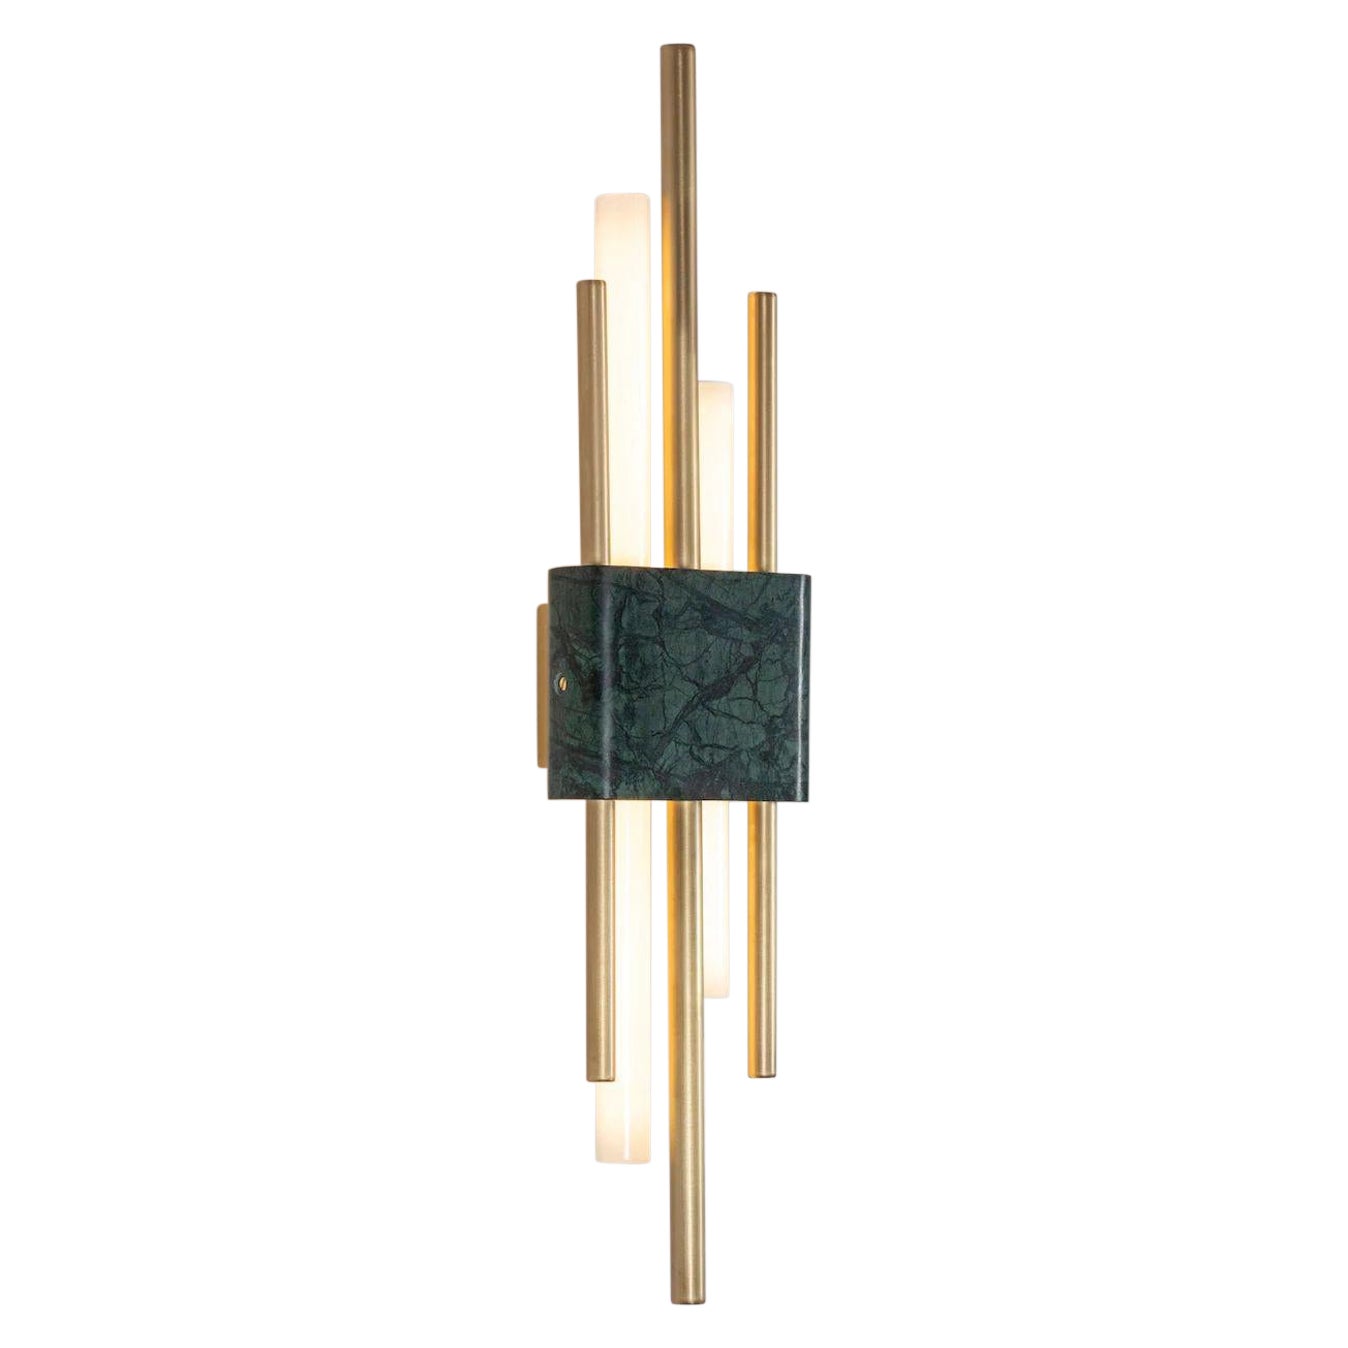 Tanto Wall Light, Double, Green Marble by Bert Frank